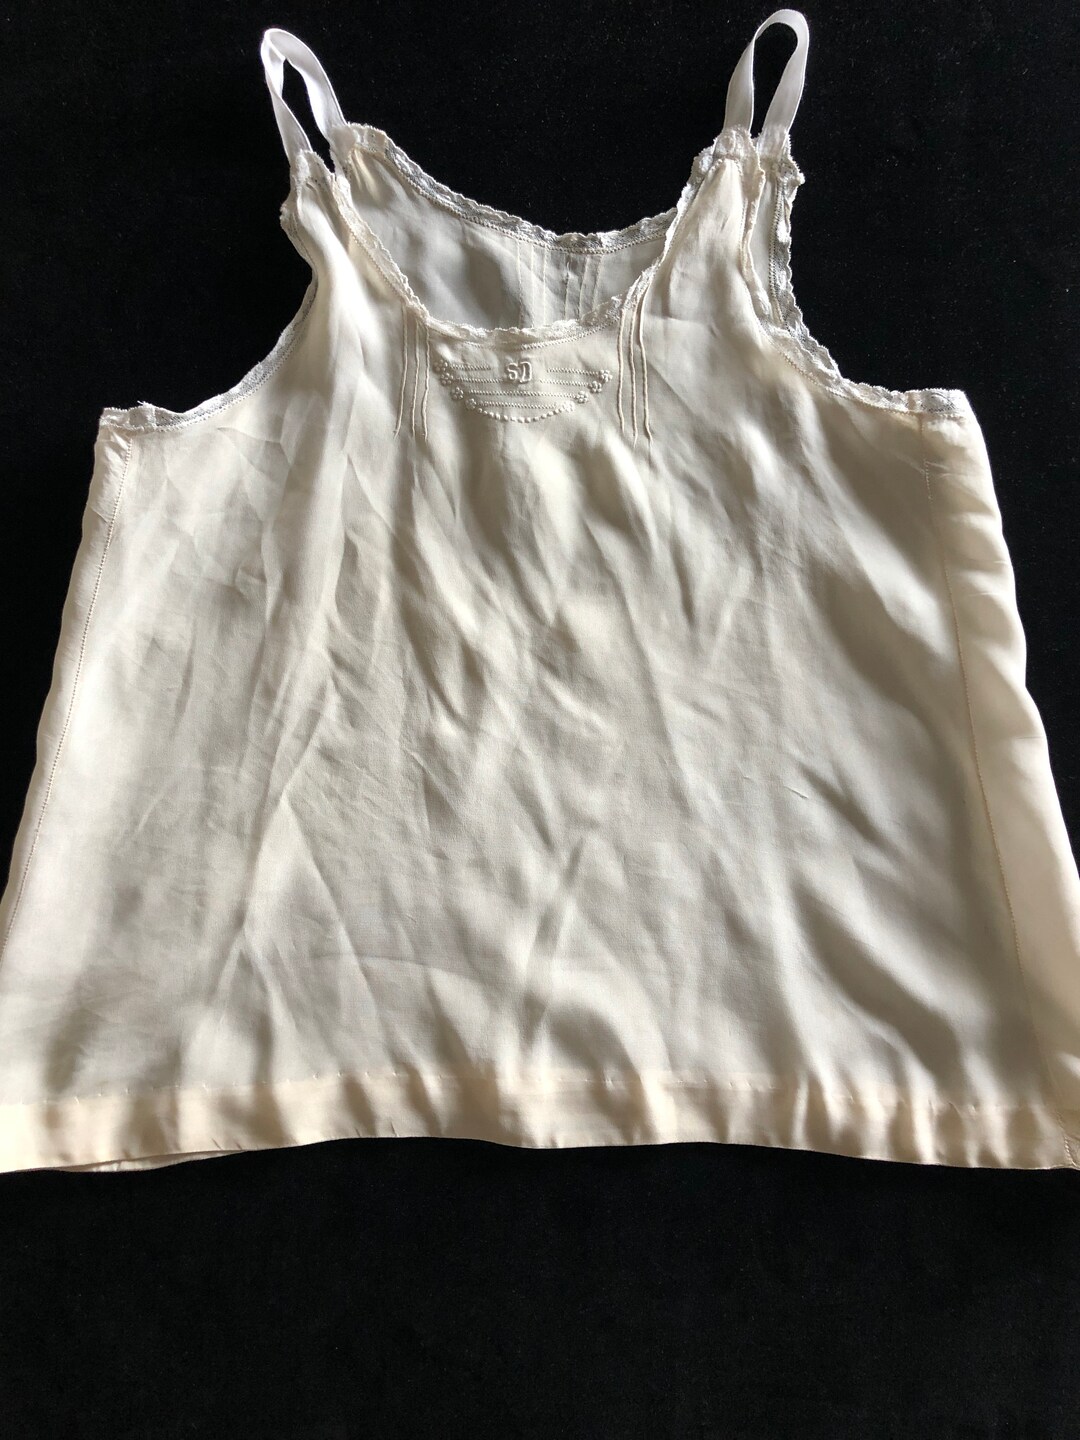 Sweet Little Vintage Camisole Undershirt in Ivory Color - Etsy